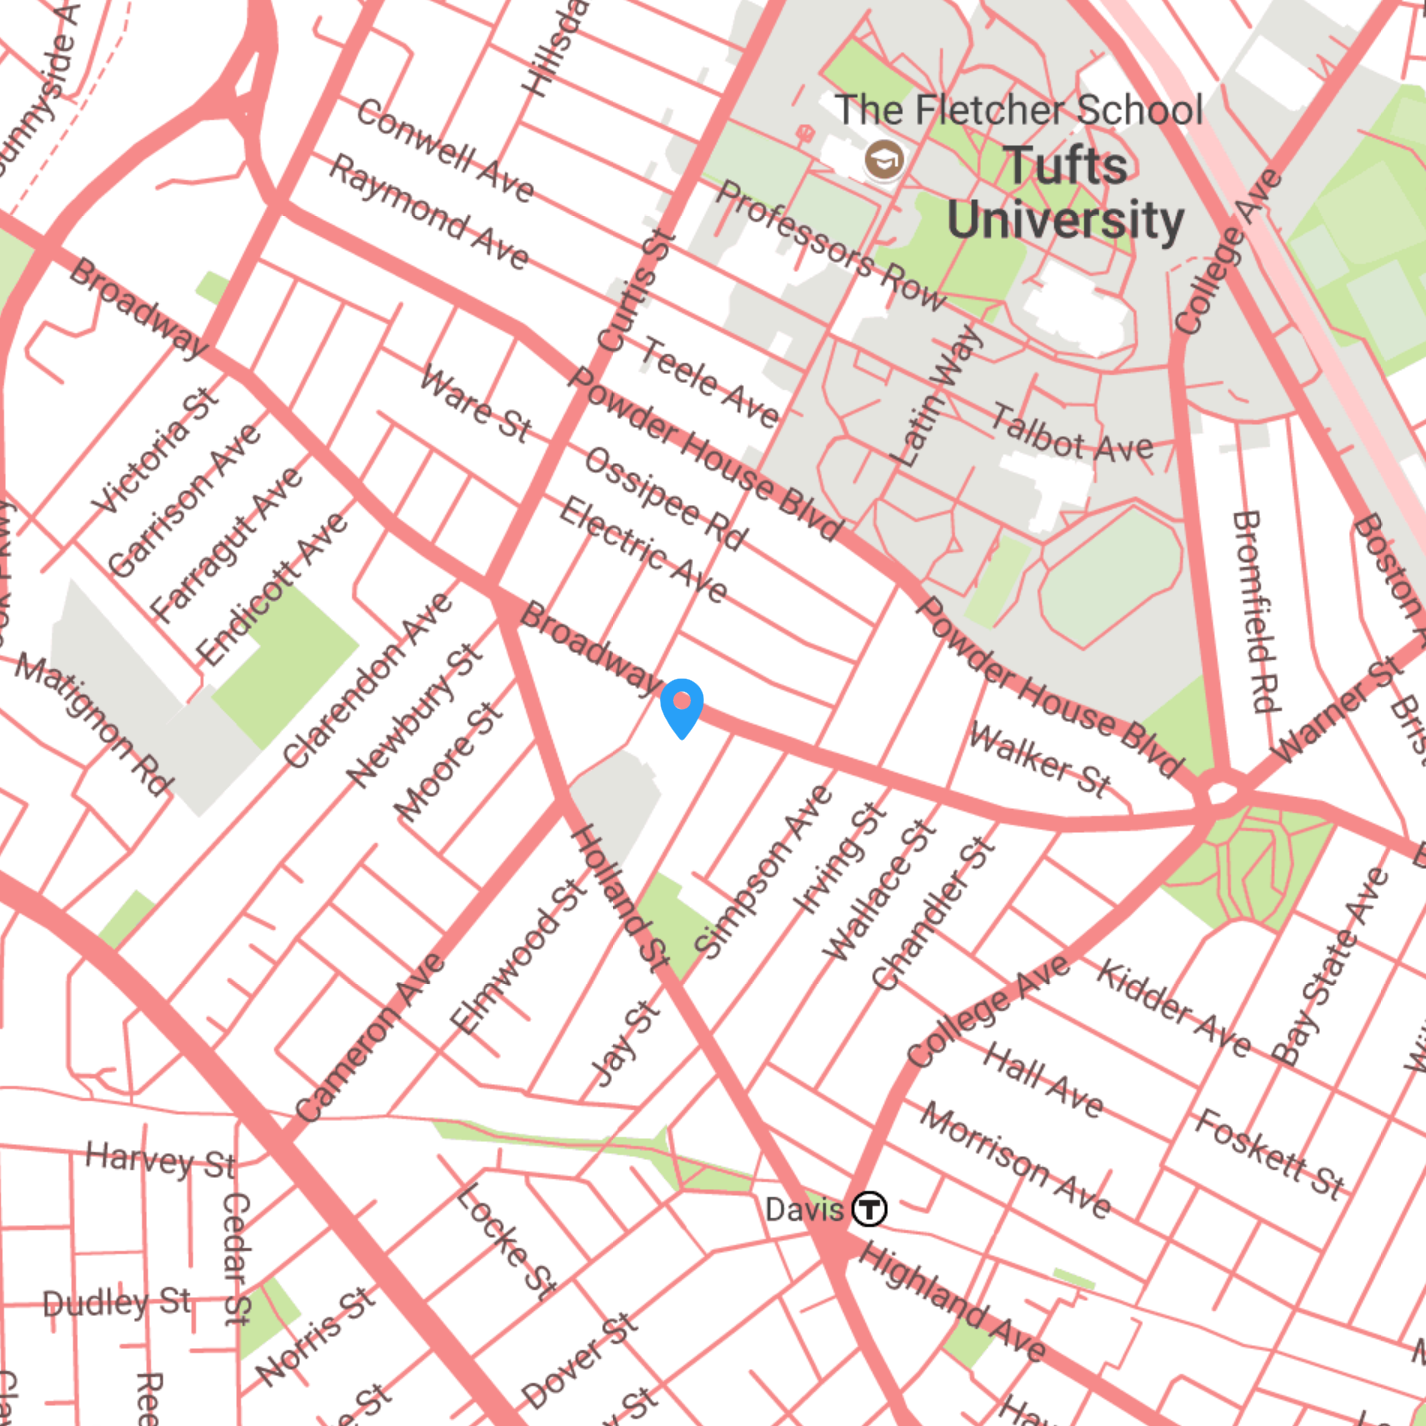 Map of the location of Powderhouse Studios campus